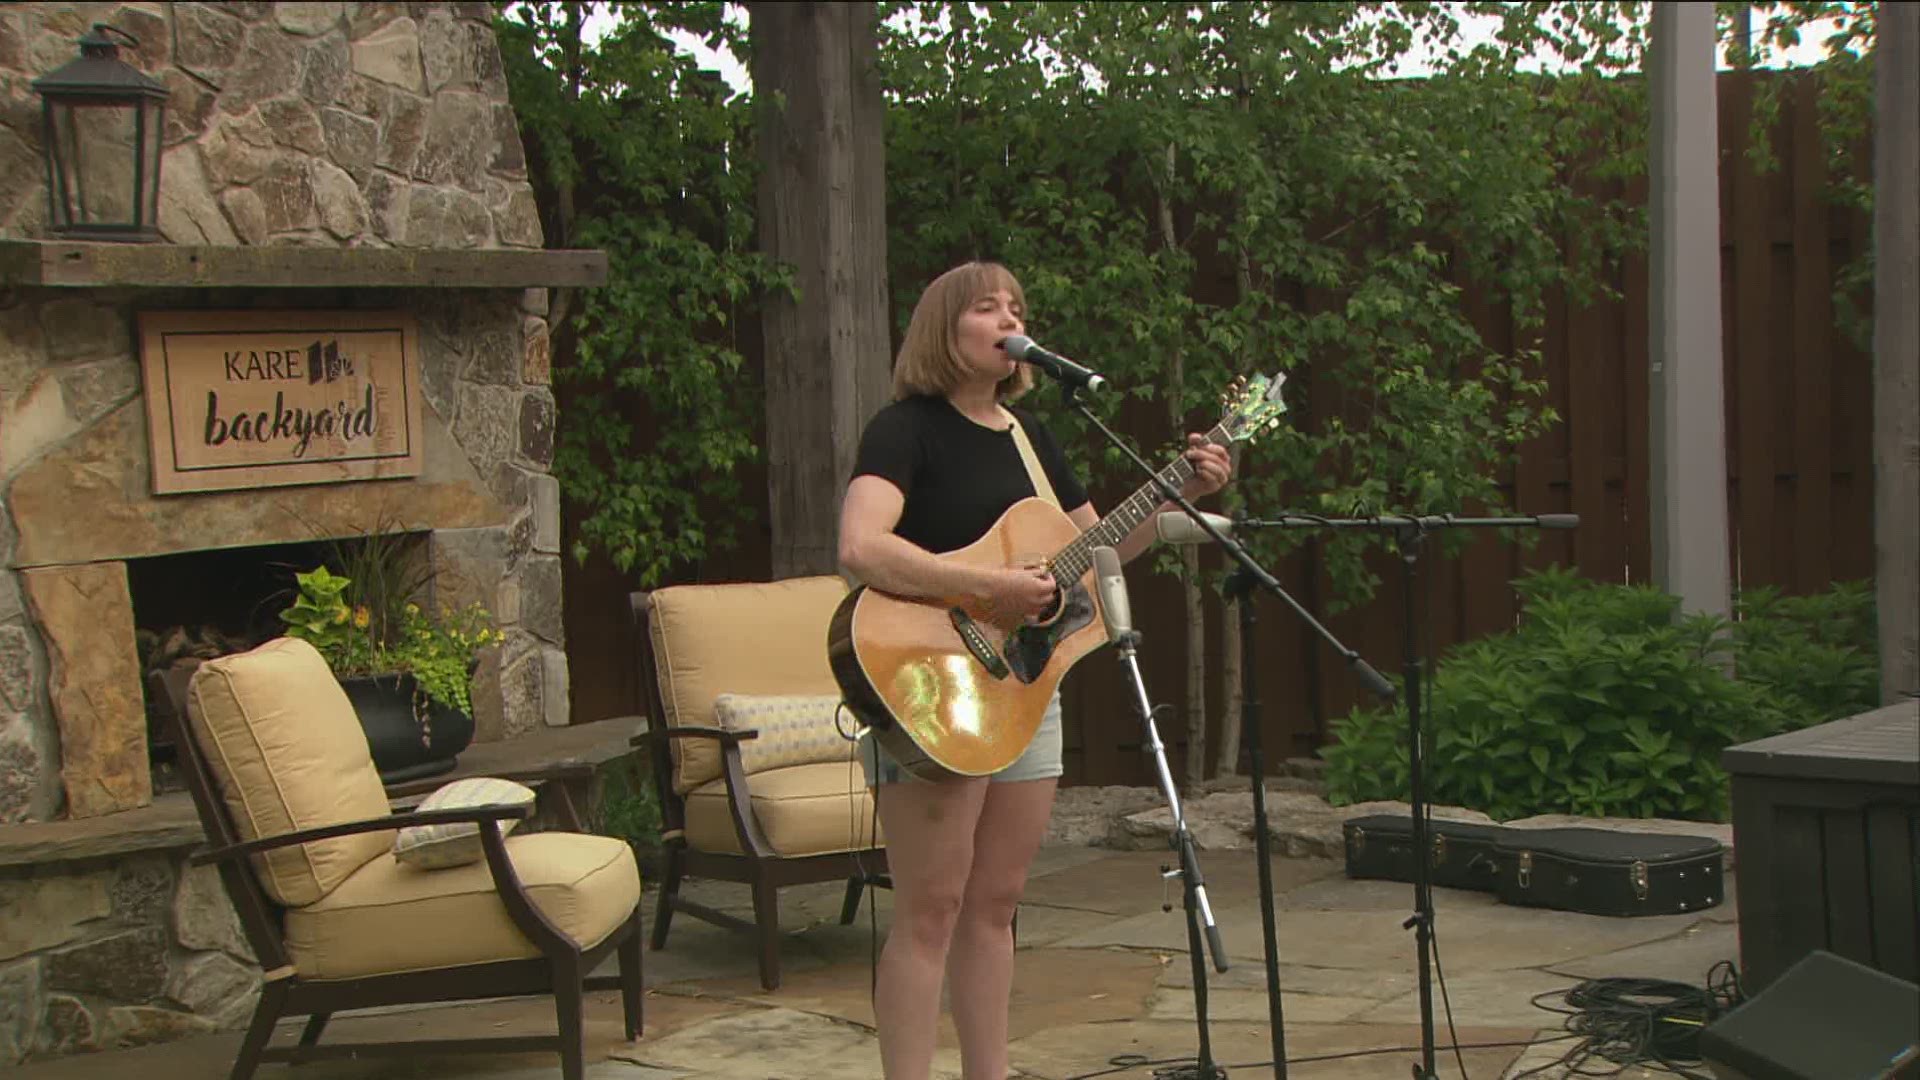 KARE 11 is kicking off a Friday backyard concert series we call "MN Bands Together." Leading things off is Emily Haavik of Emily Haavik & the 35s.